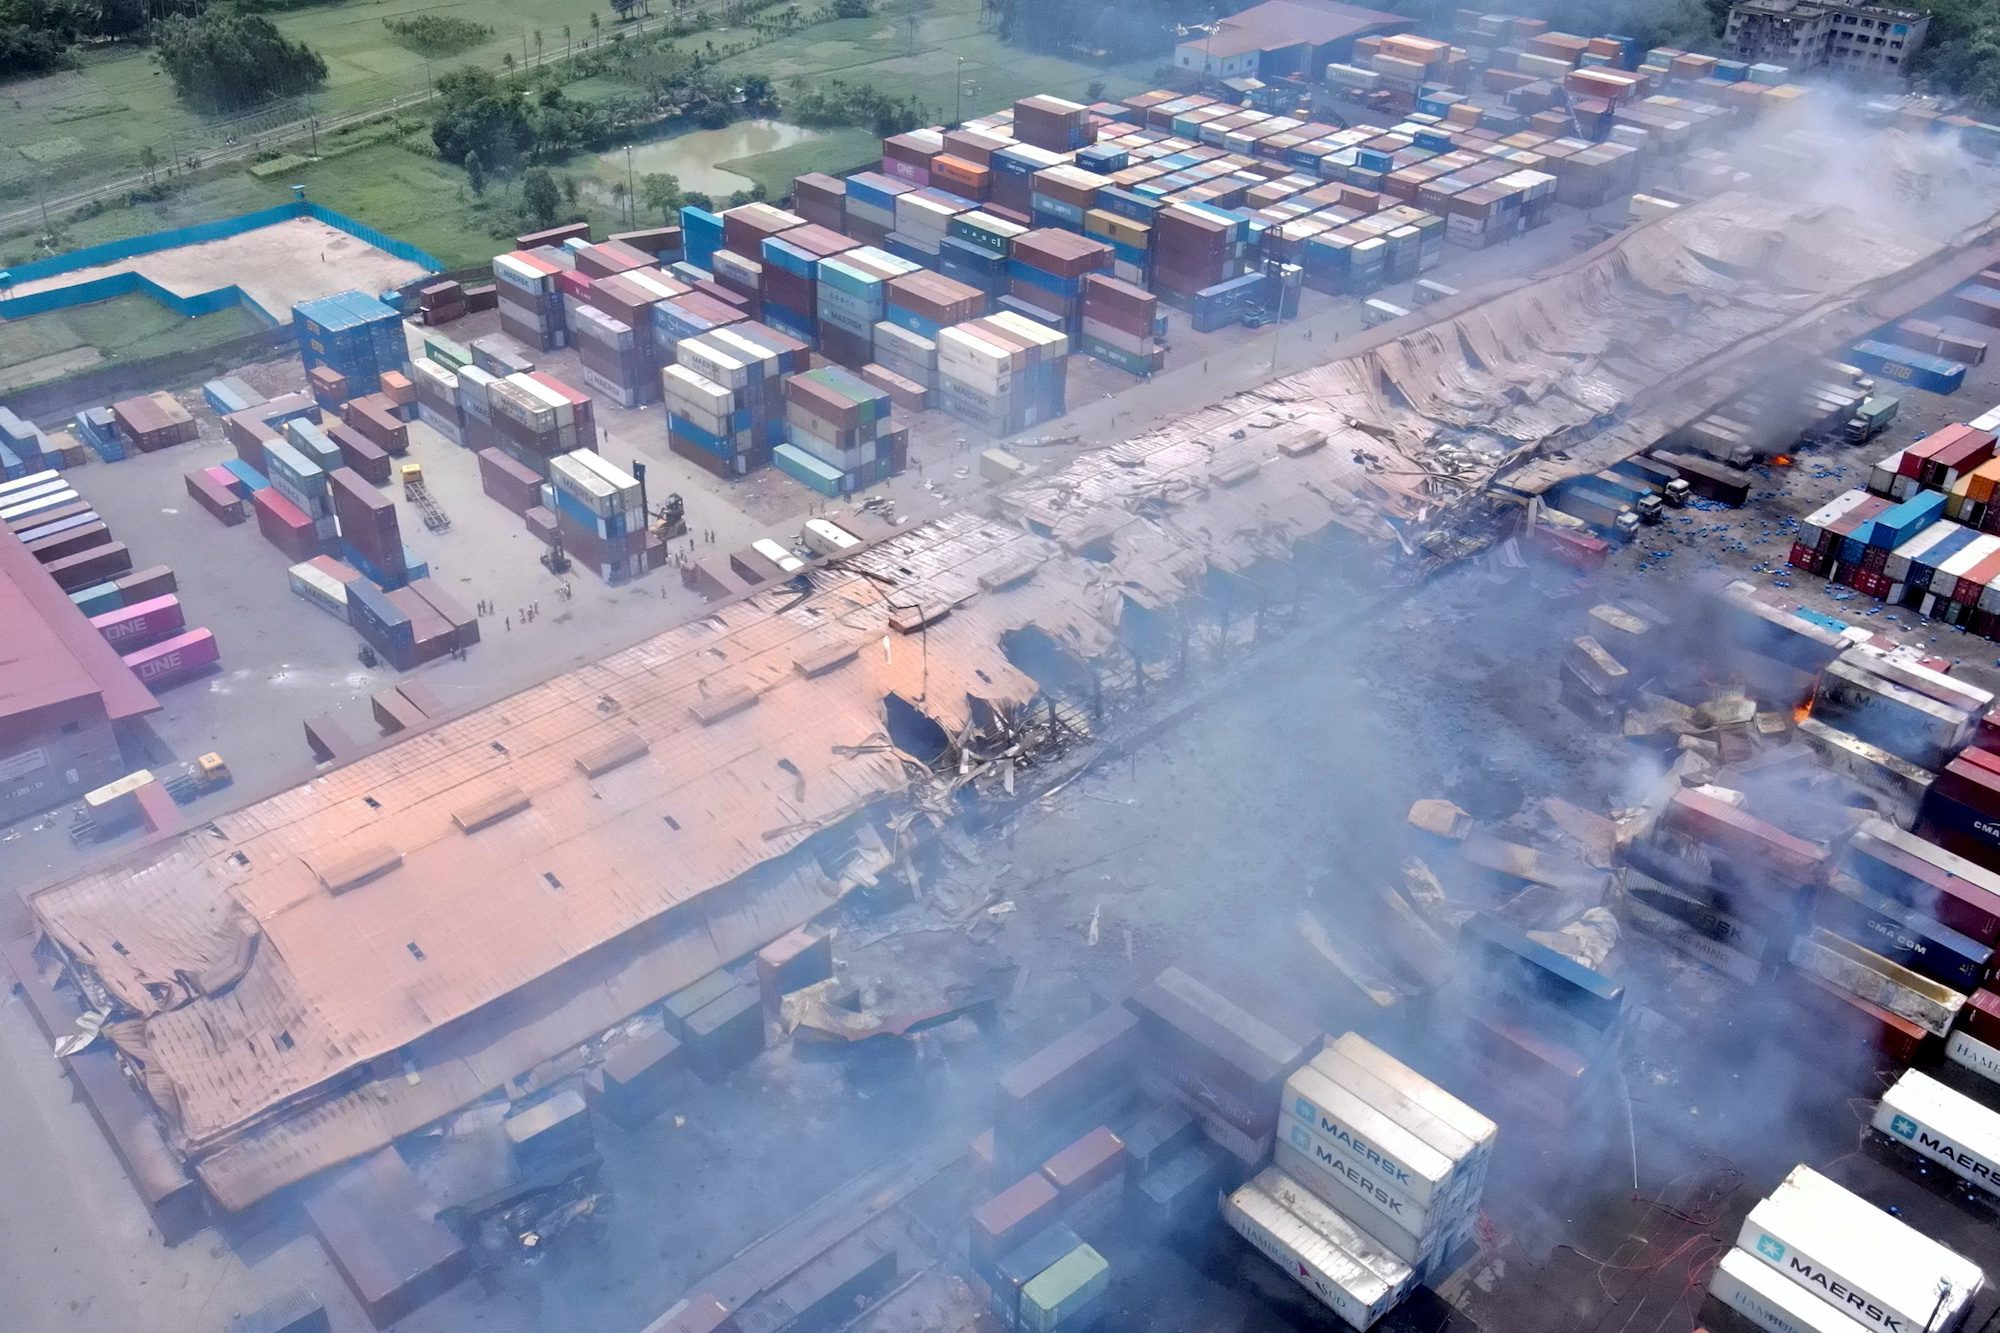 Bangladesh Battles Container Depot Fire That Killed 41